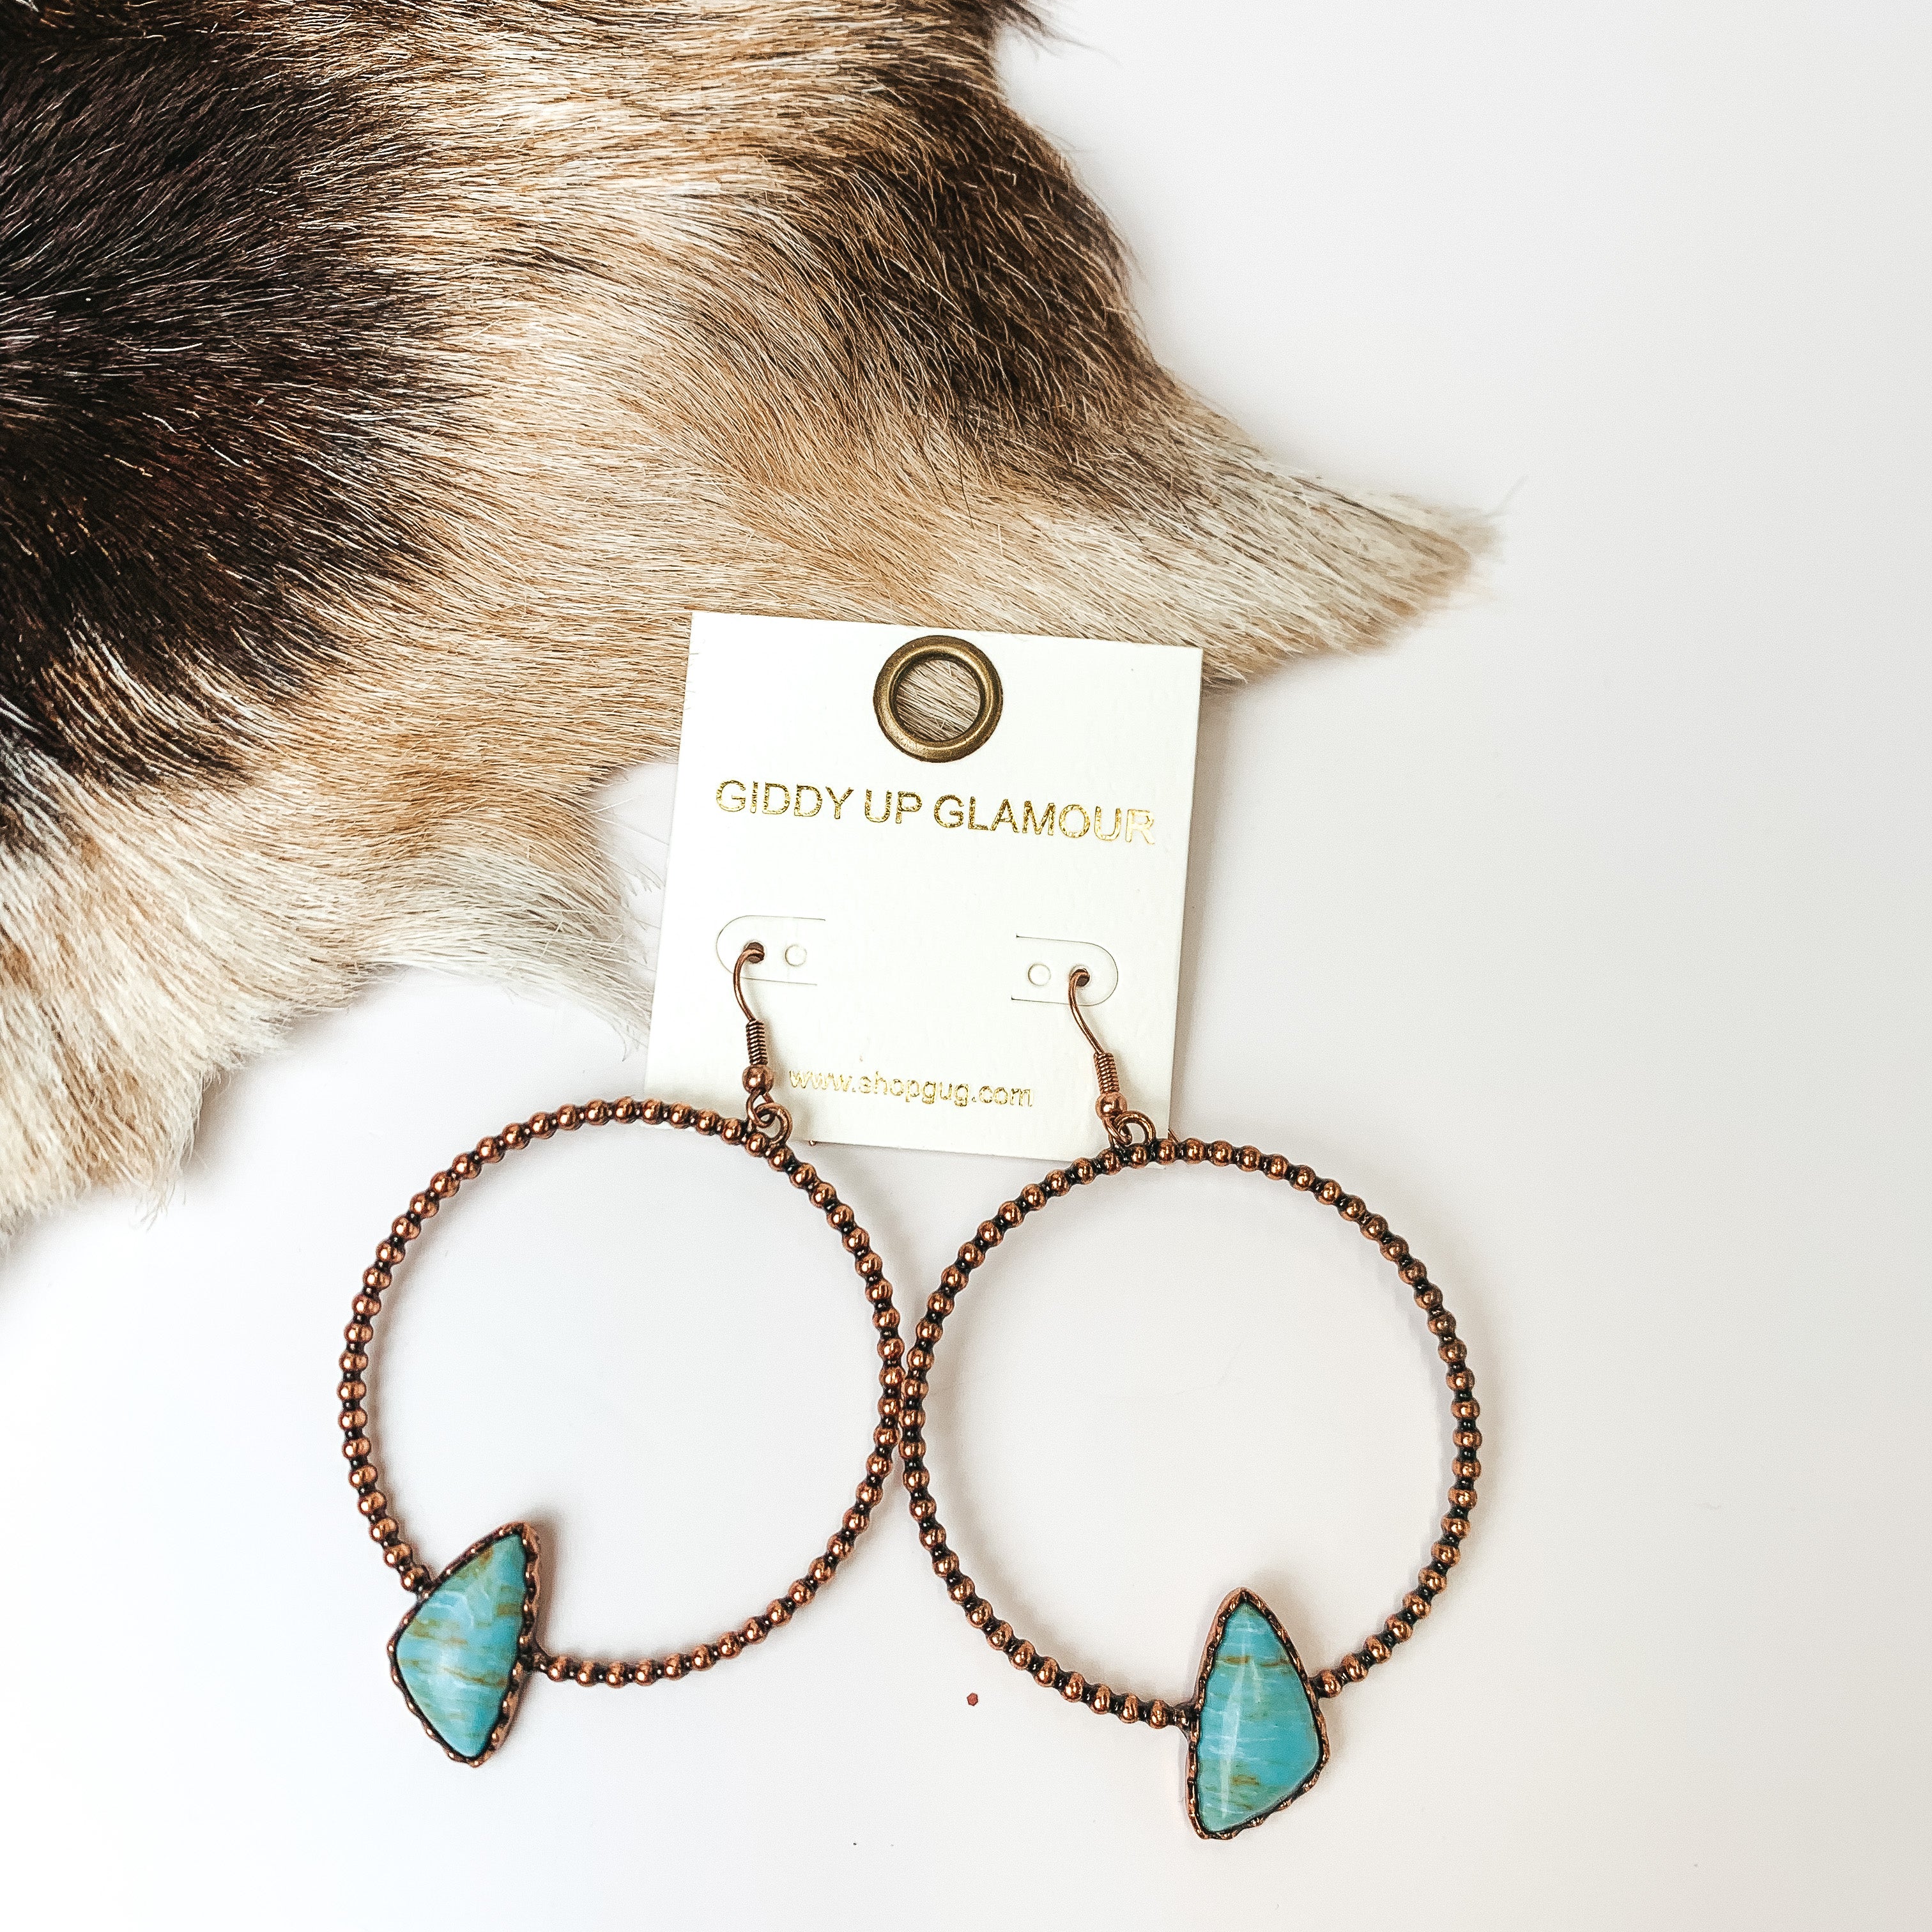 Copper Tone Textured Hoop Earrings with Turquoise Blue Stone - Giddy Up Glamour Boutique